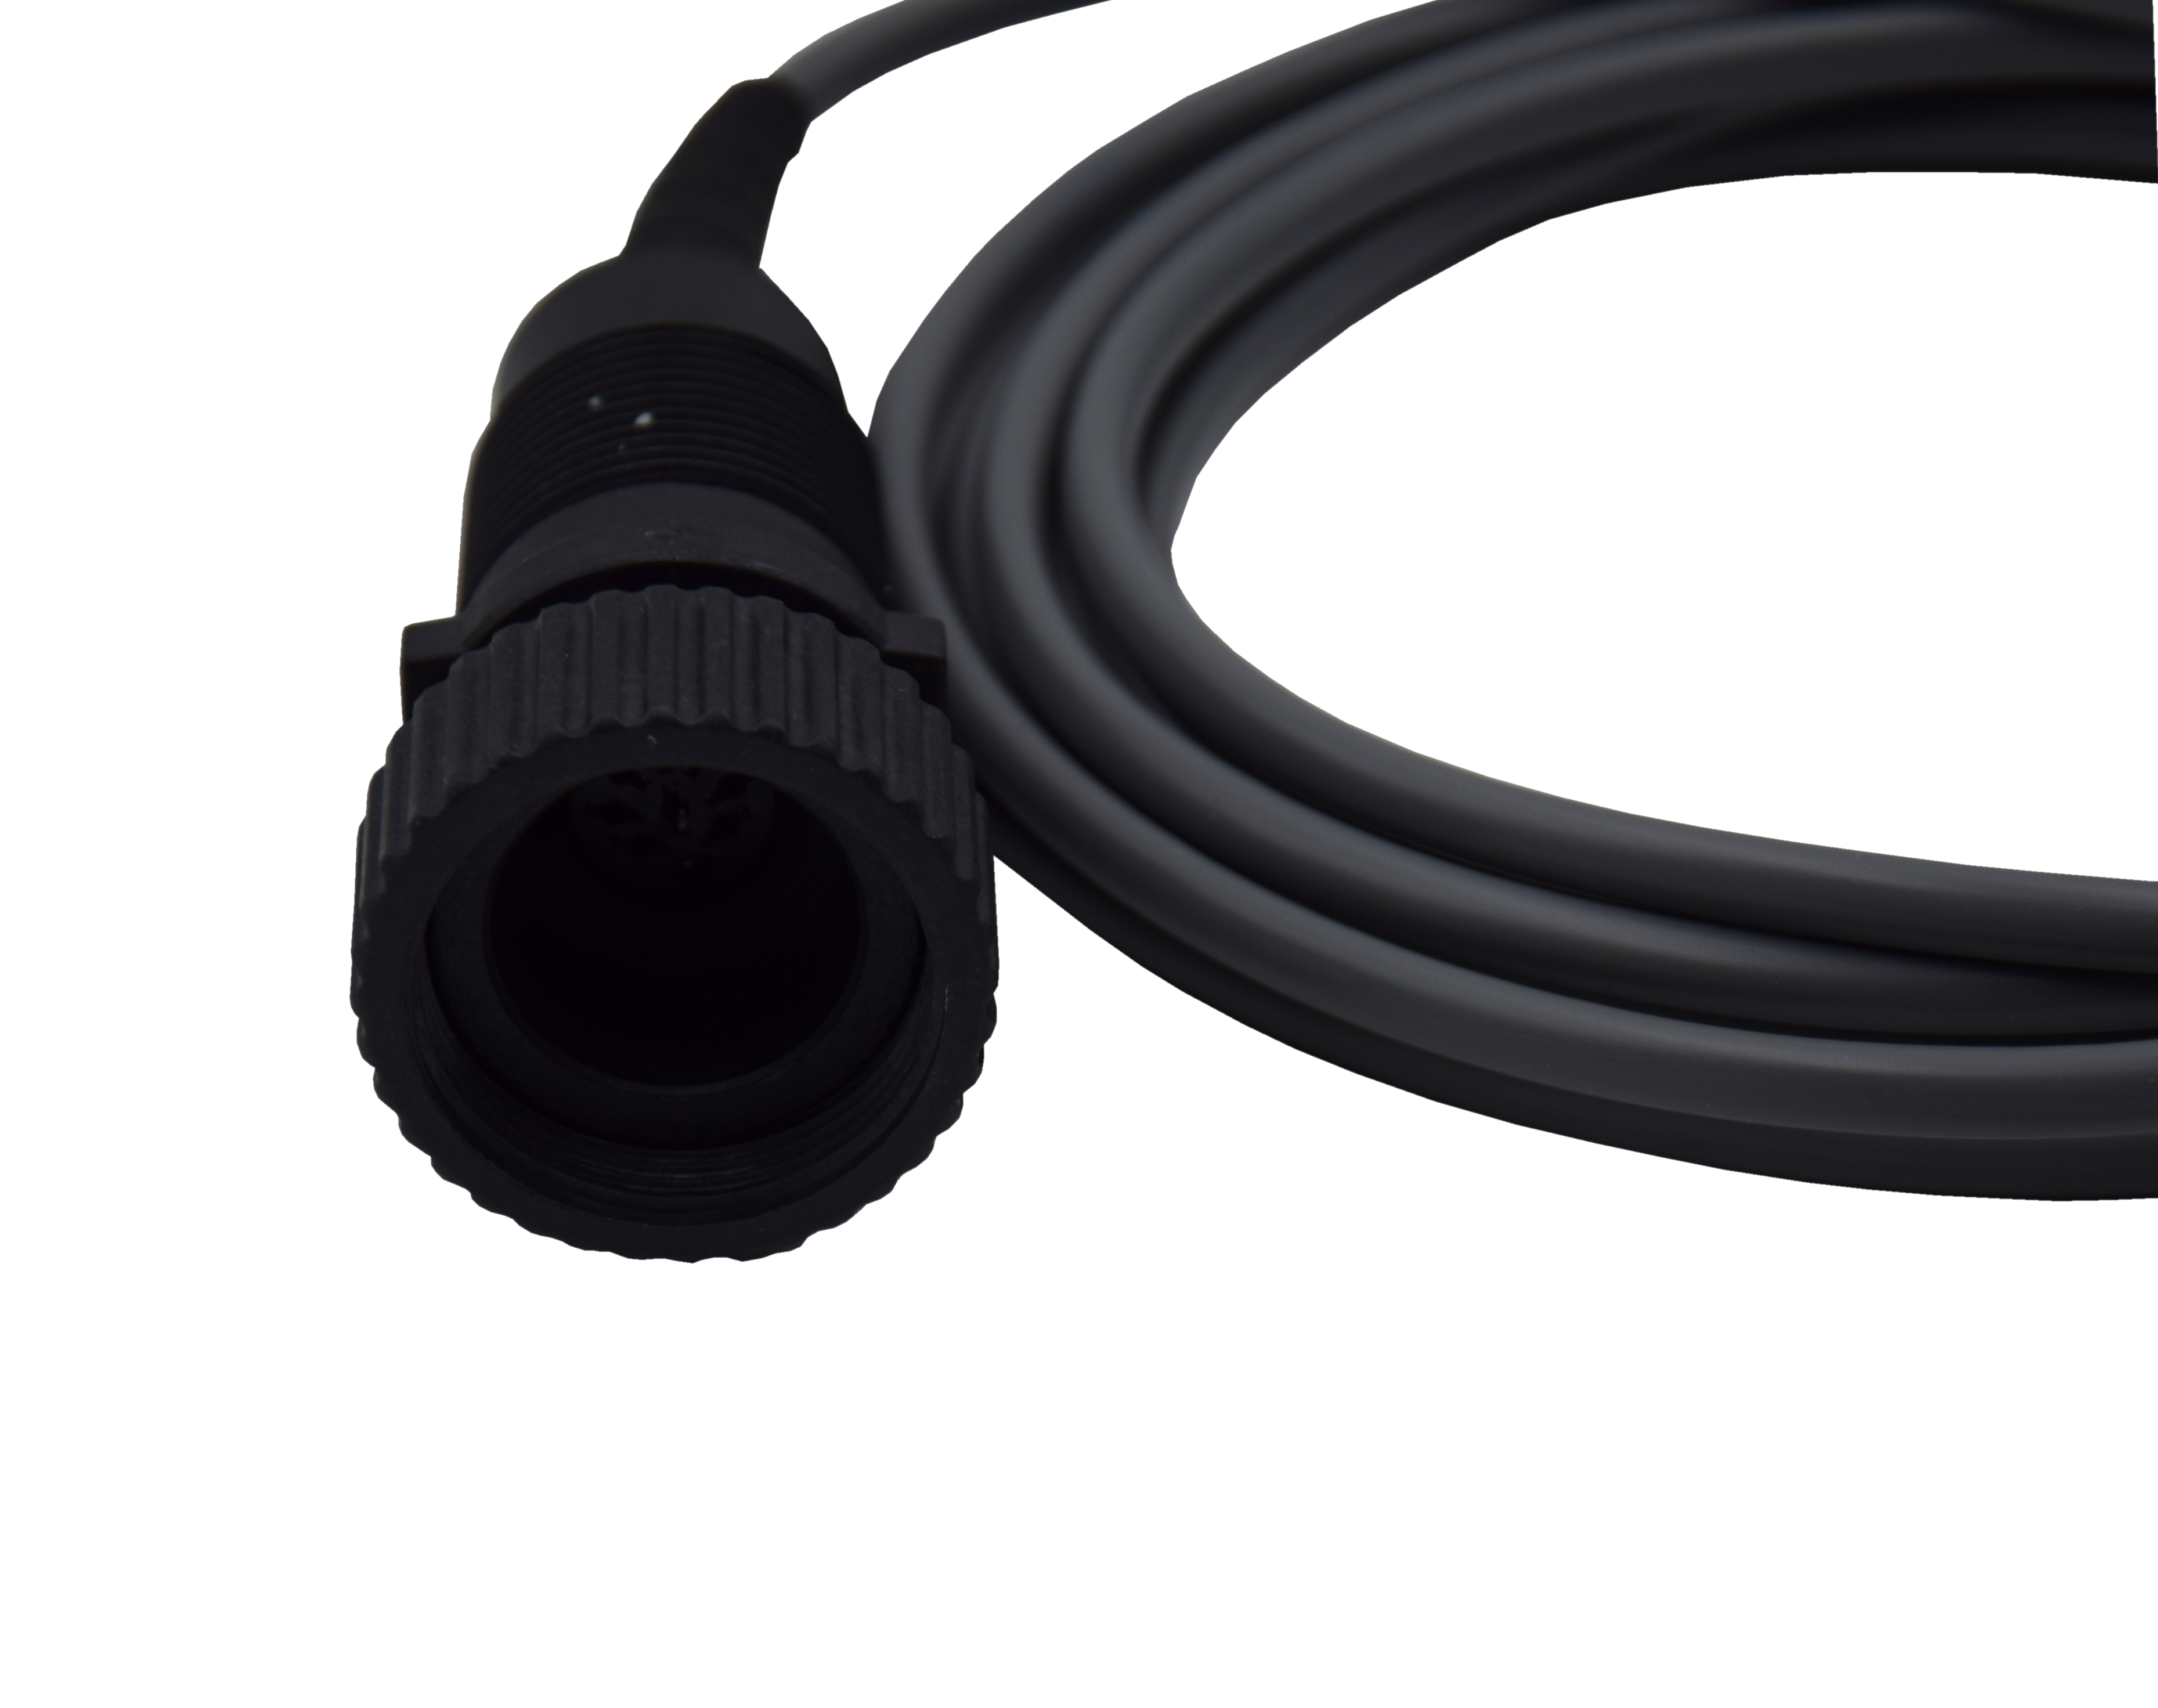 Select connection cable